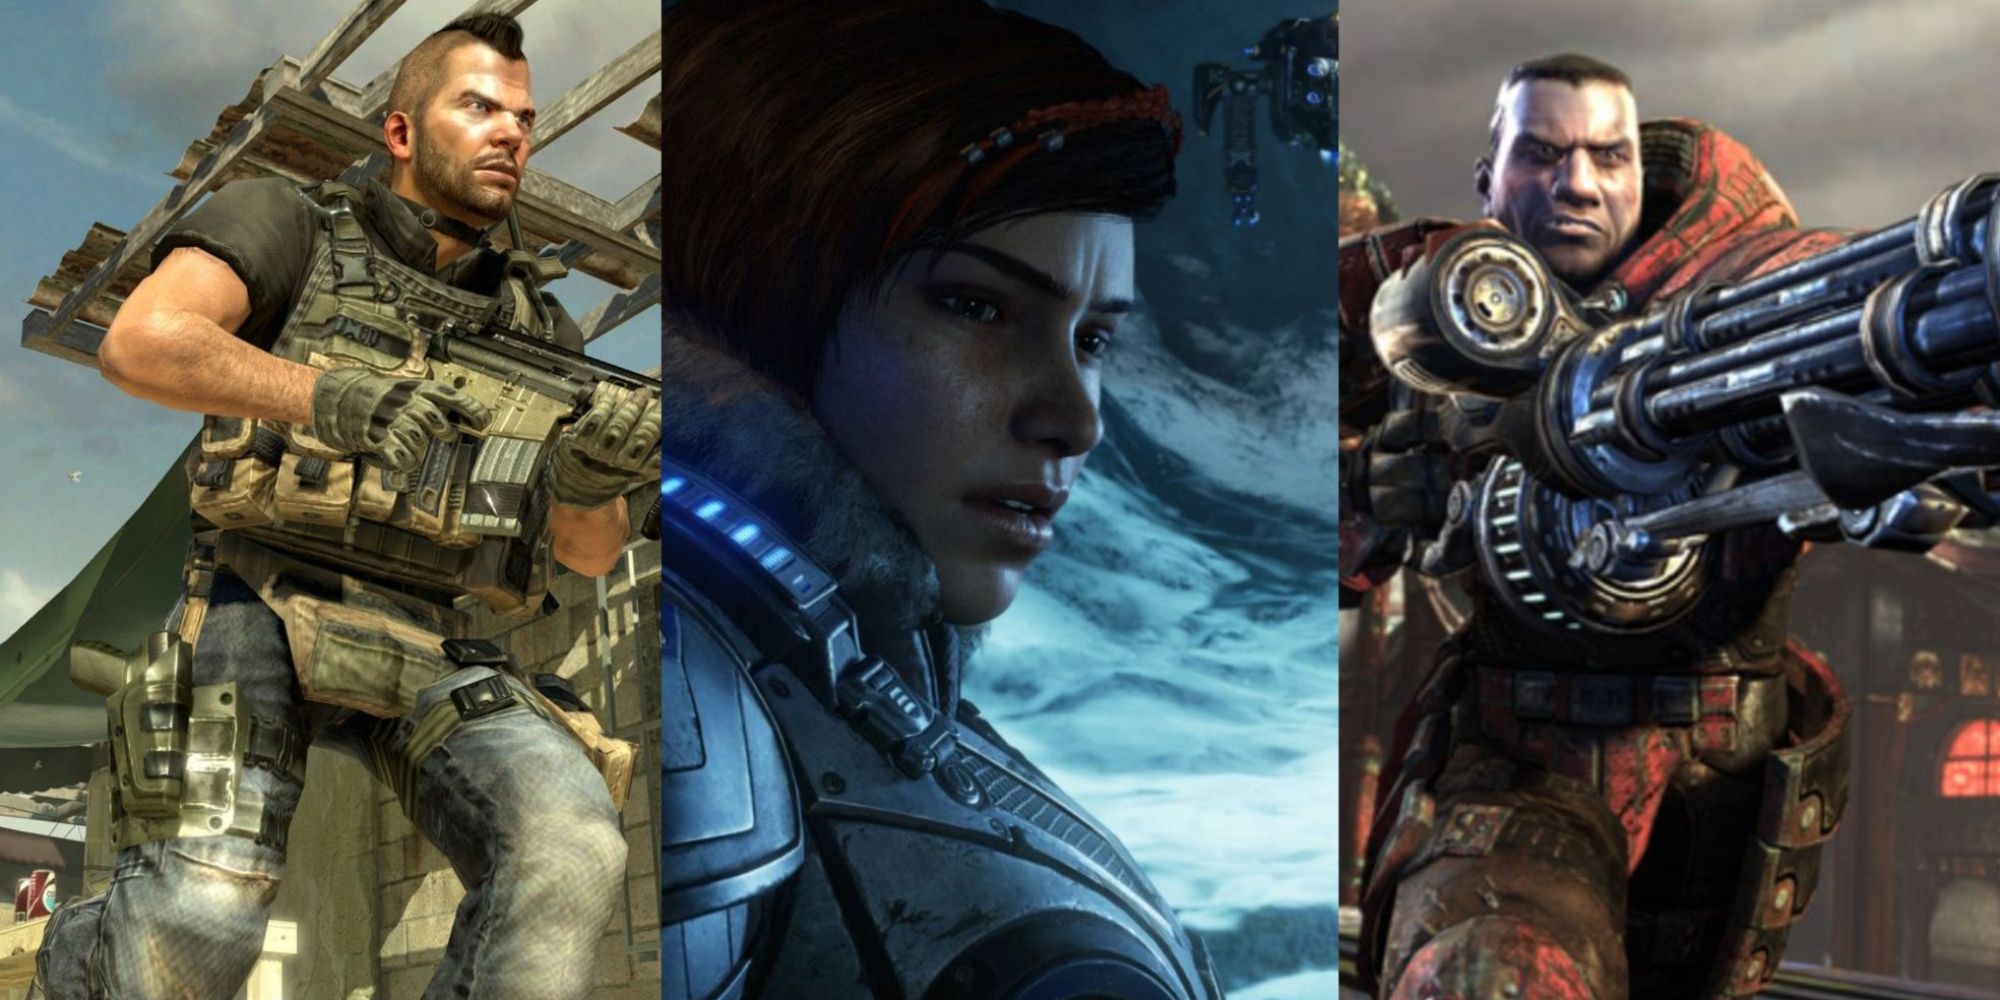 Co-op Shooters Featured Split Image Call Of Duty, Gears 5, and Unreal Tournament 3